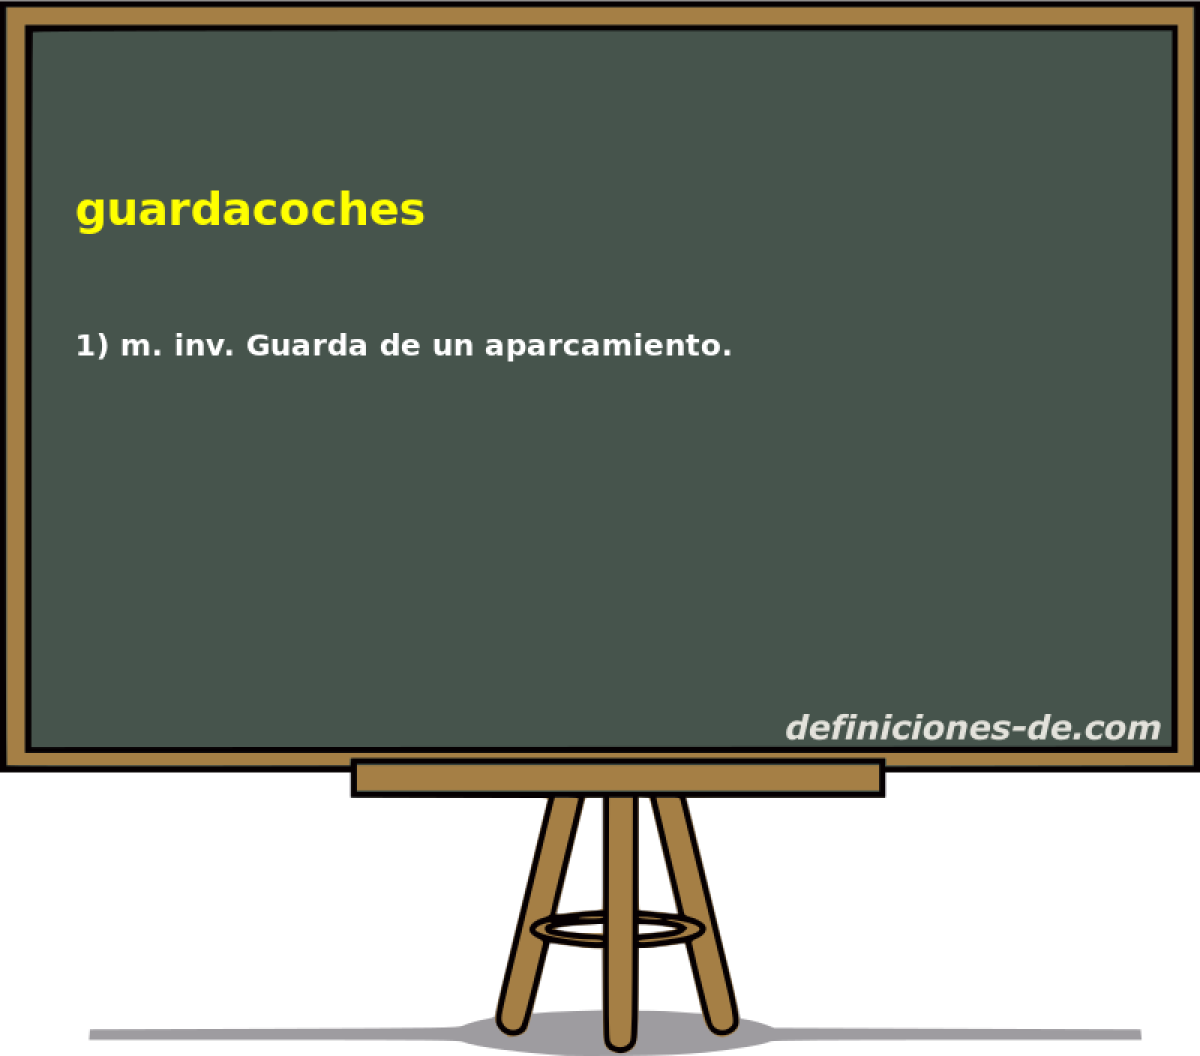 guardacoches 